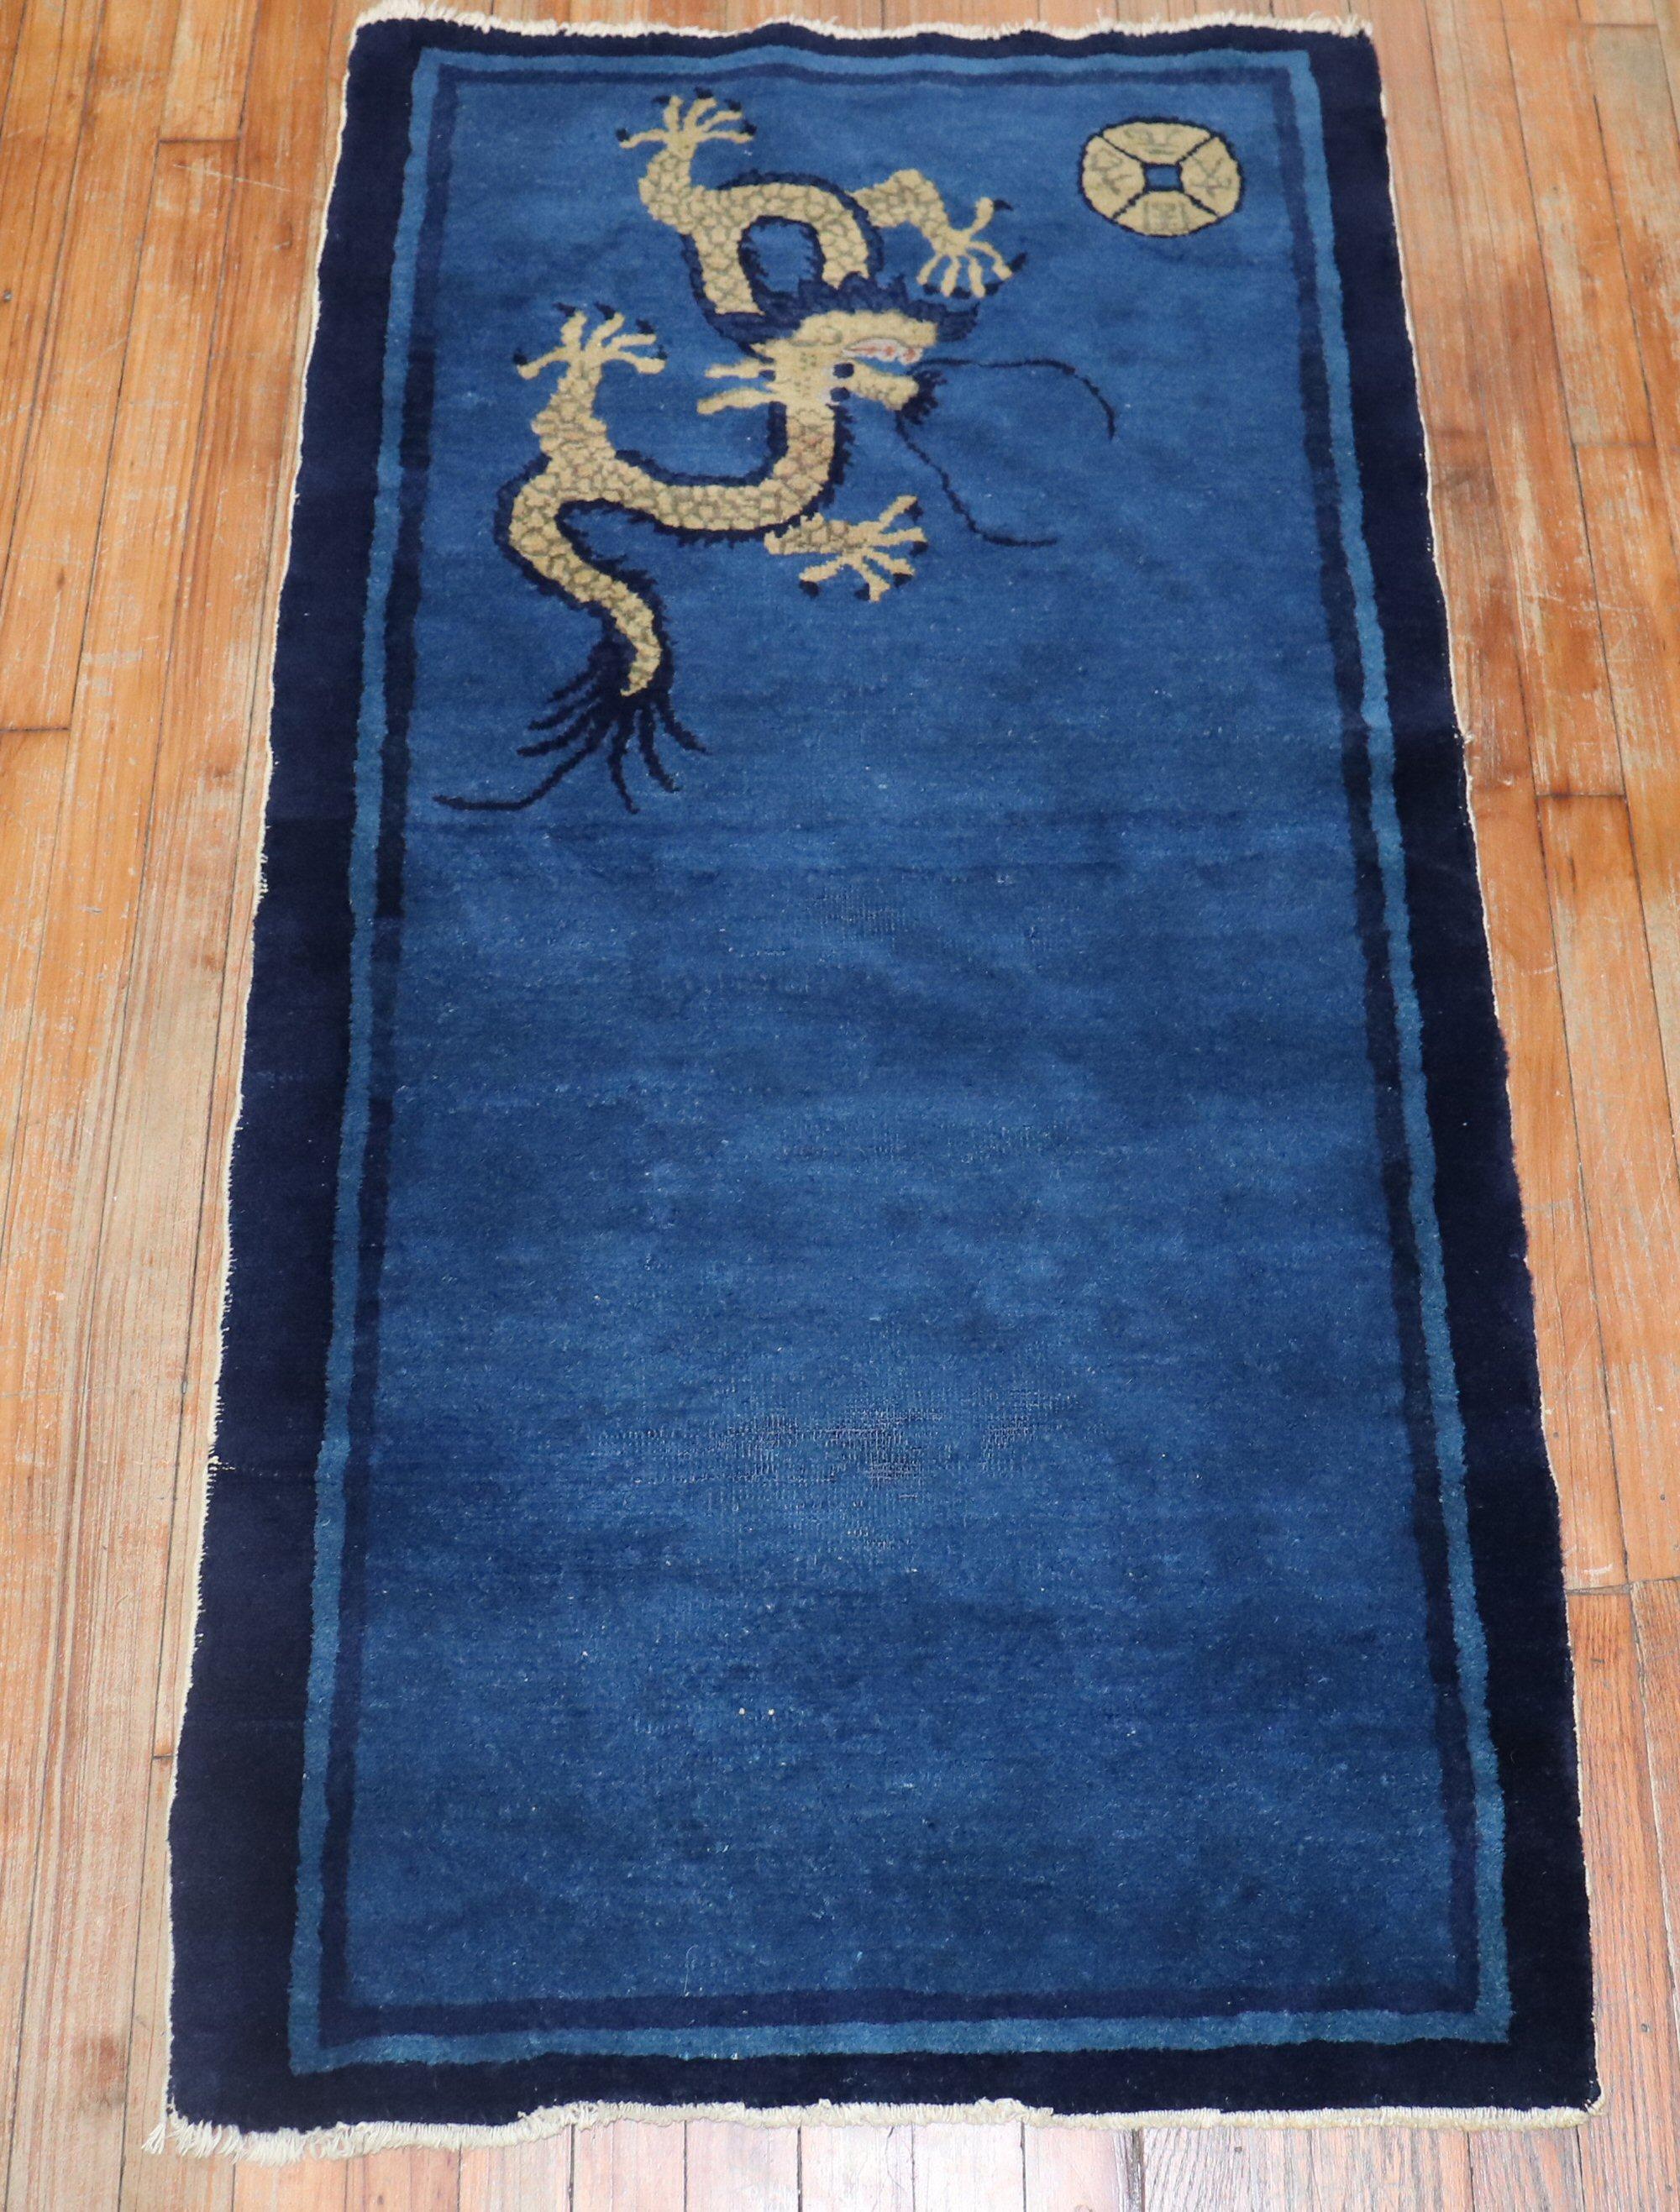 An early 20th century Chinese rug with 1 dragon floating on a plain blue ground

Measures: 2'6